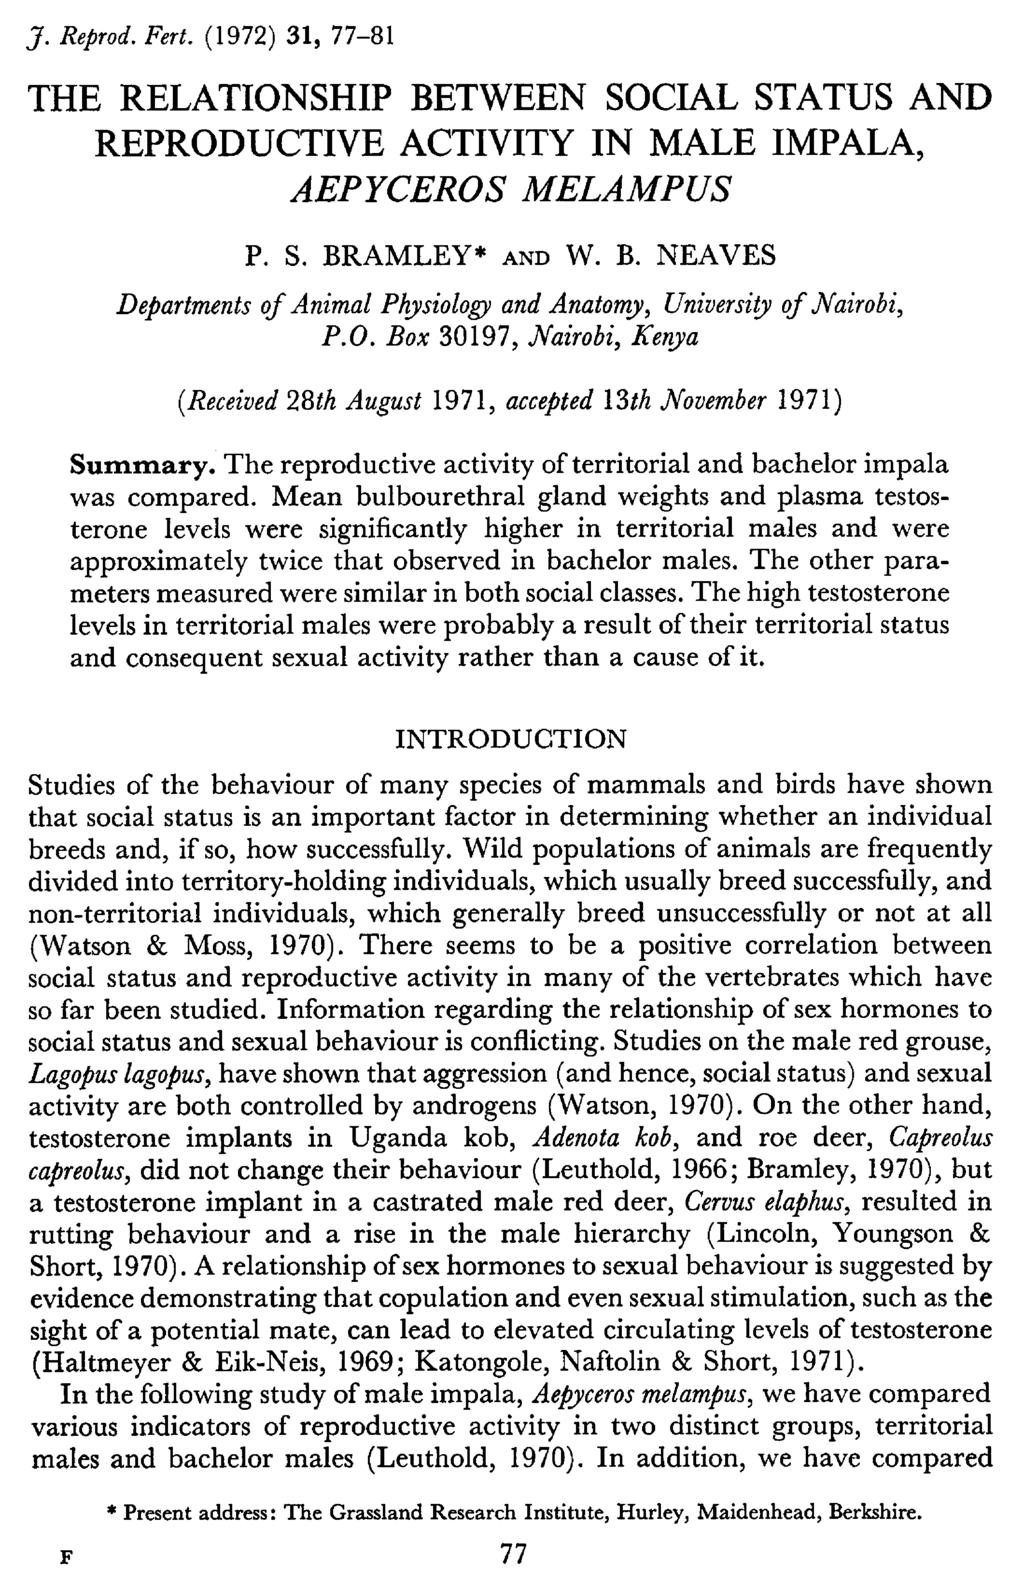 THE RELATIONSHIP BETWEEN SOCIAL STATUS AND REPRODUCTIVE ACTIVITY IN MALE IMPALA, AEPYCEROS MELAMPUS P. S. BRAMLEY and W. B. NEAVES Departments of Animal Physiology and Anatomy, University of Nairobi, P.